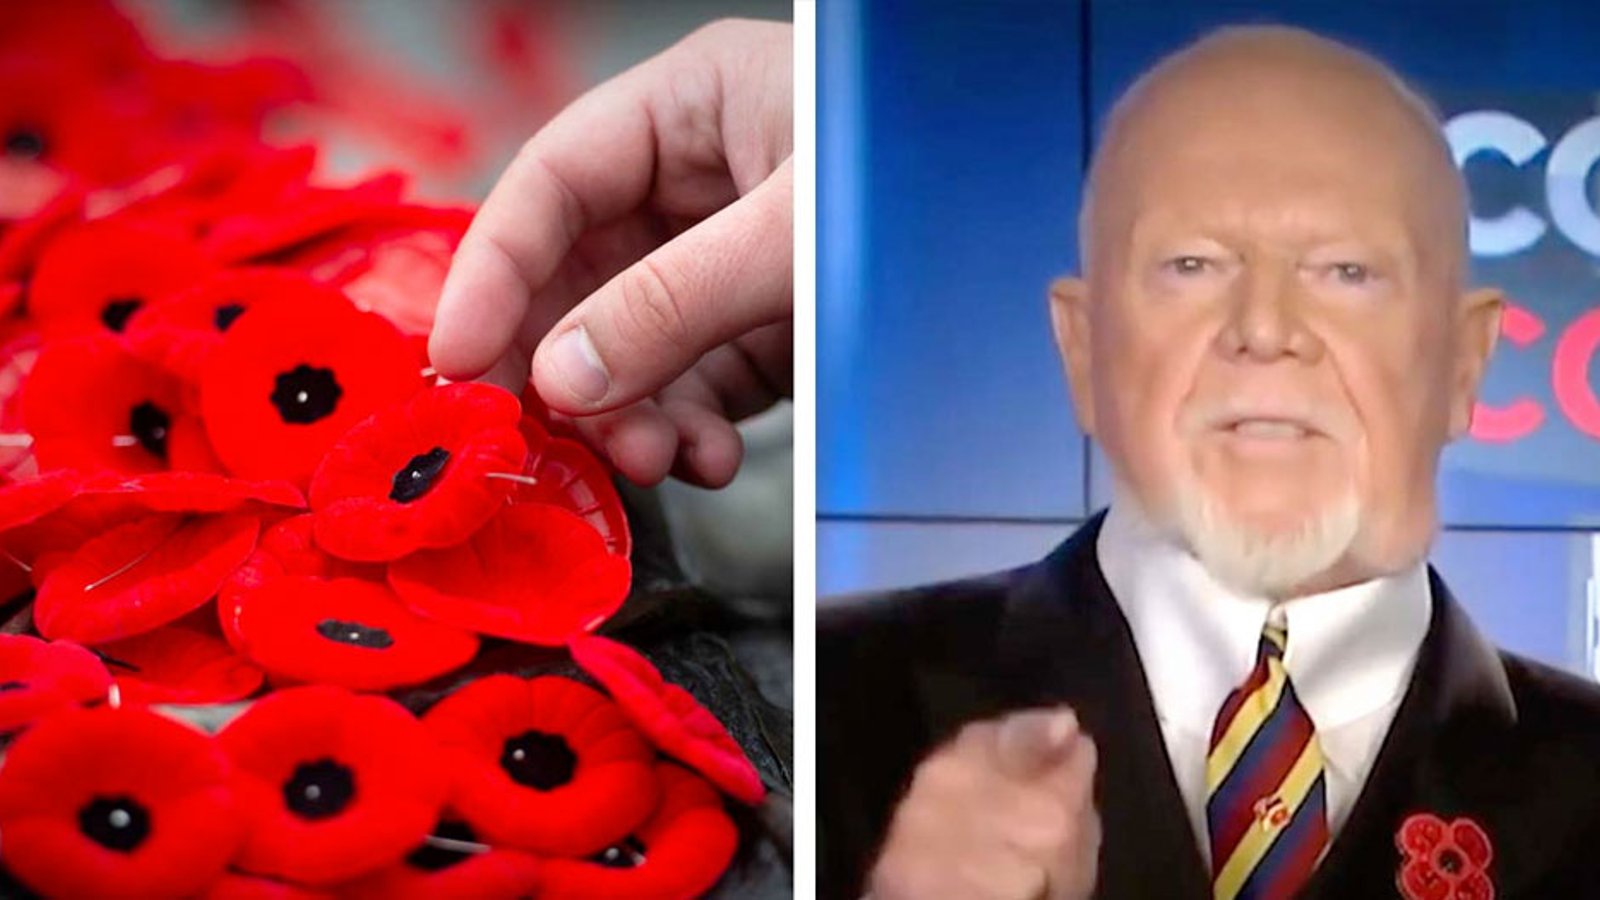 Nearly 75,000 fans sign petition supporting Don Cherry and call for him to be reinstated at Sportsnet